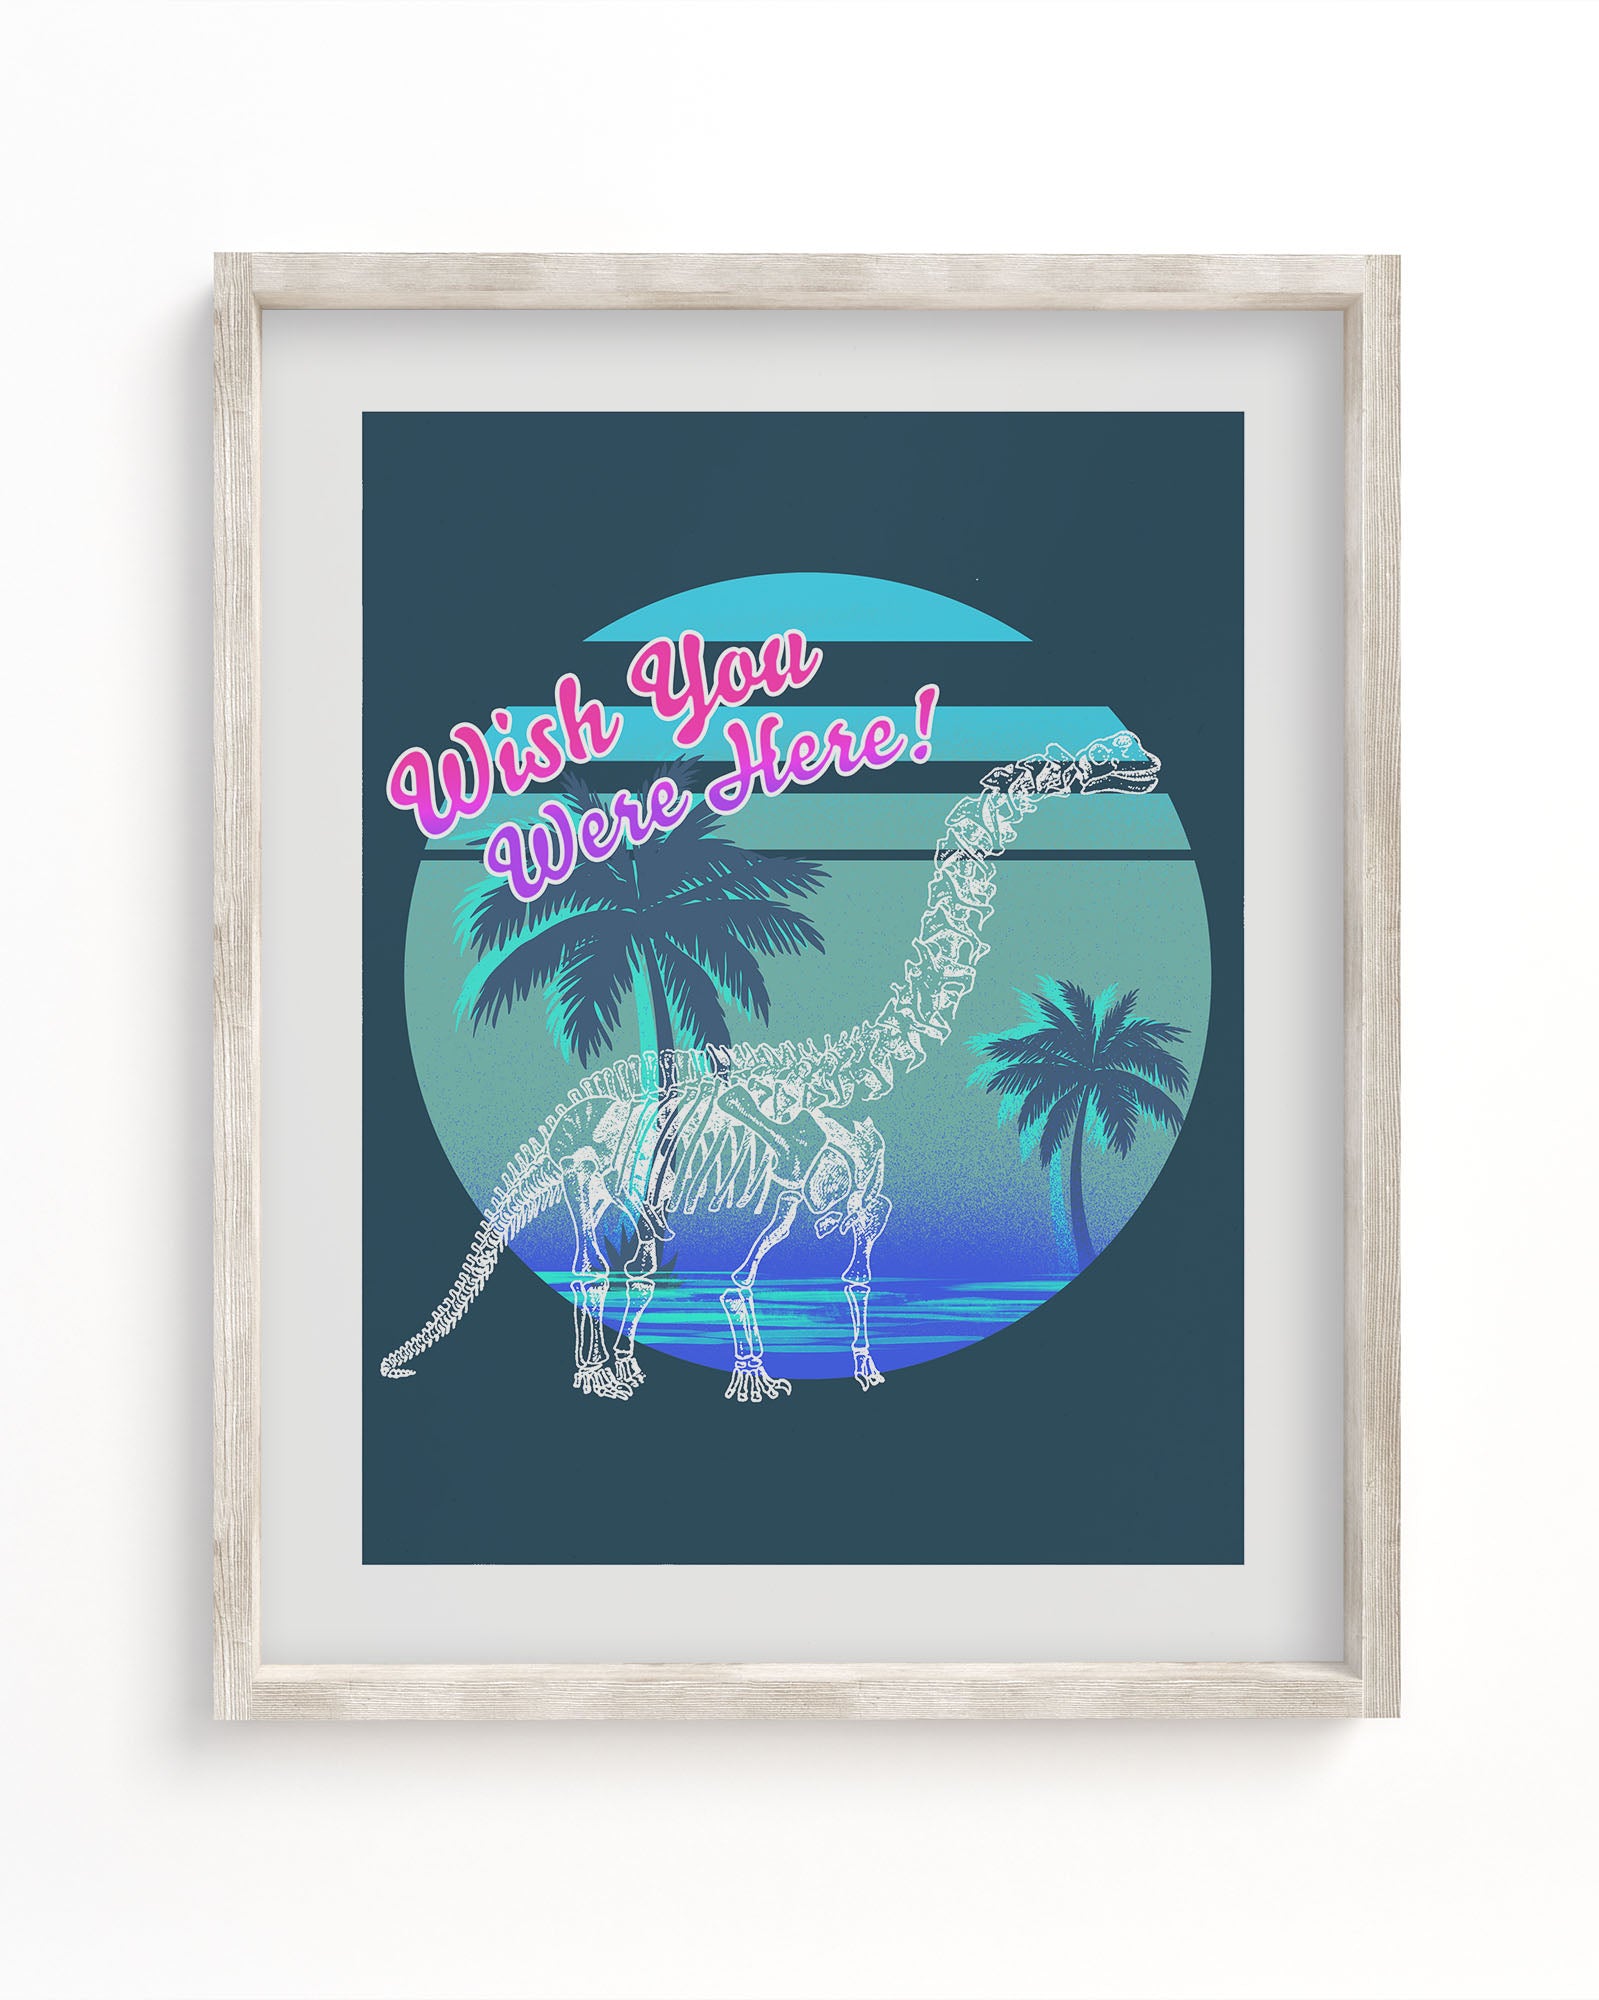 A Cognitive Surplus framed art print with Dino: Wish You Were Here! Museum Print, featuring a dinosaur and palm trees.